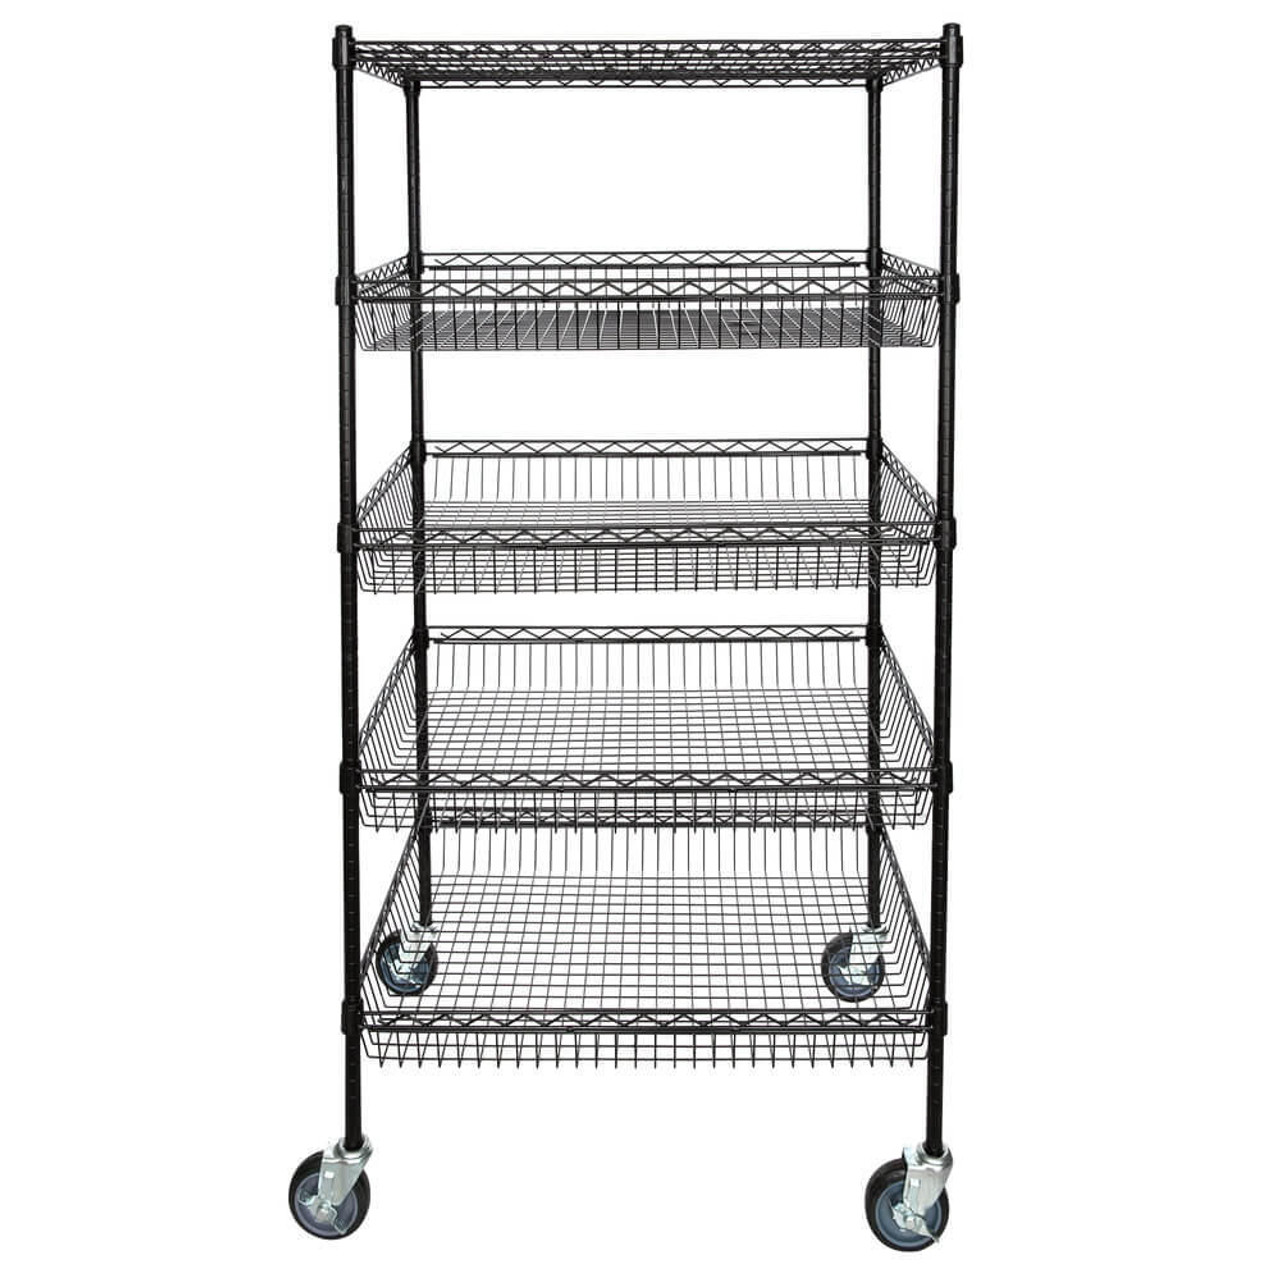 Chicken Pieces CP 24" x 36" x 70" NSF Black Epoxy 4 Basket and 1 Shelf Kit | Durability and Versatility for Storage Solutions 